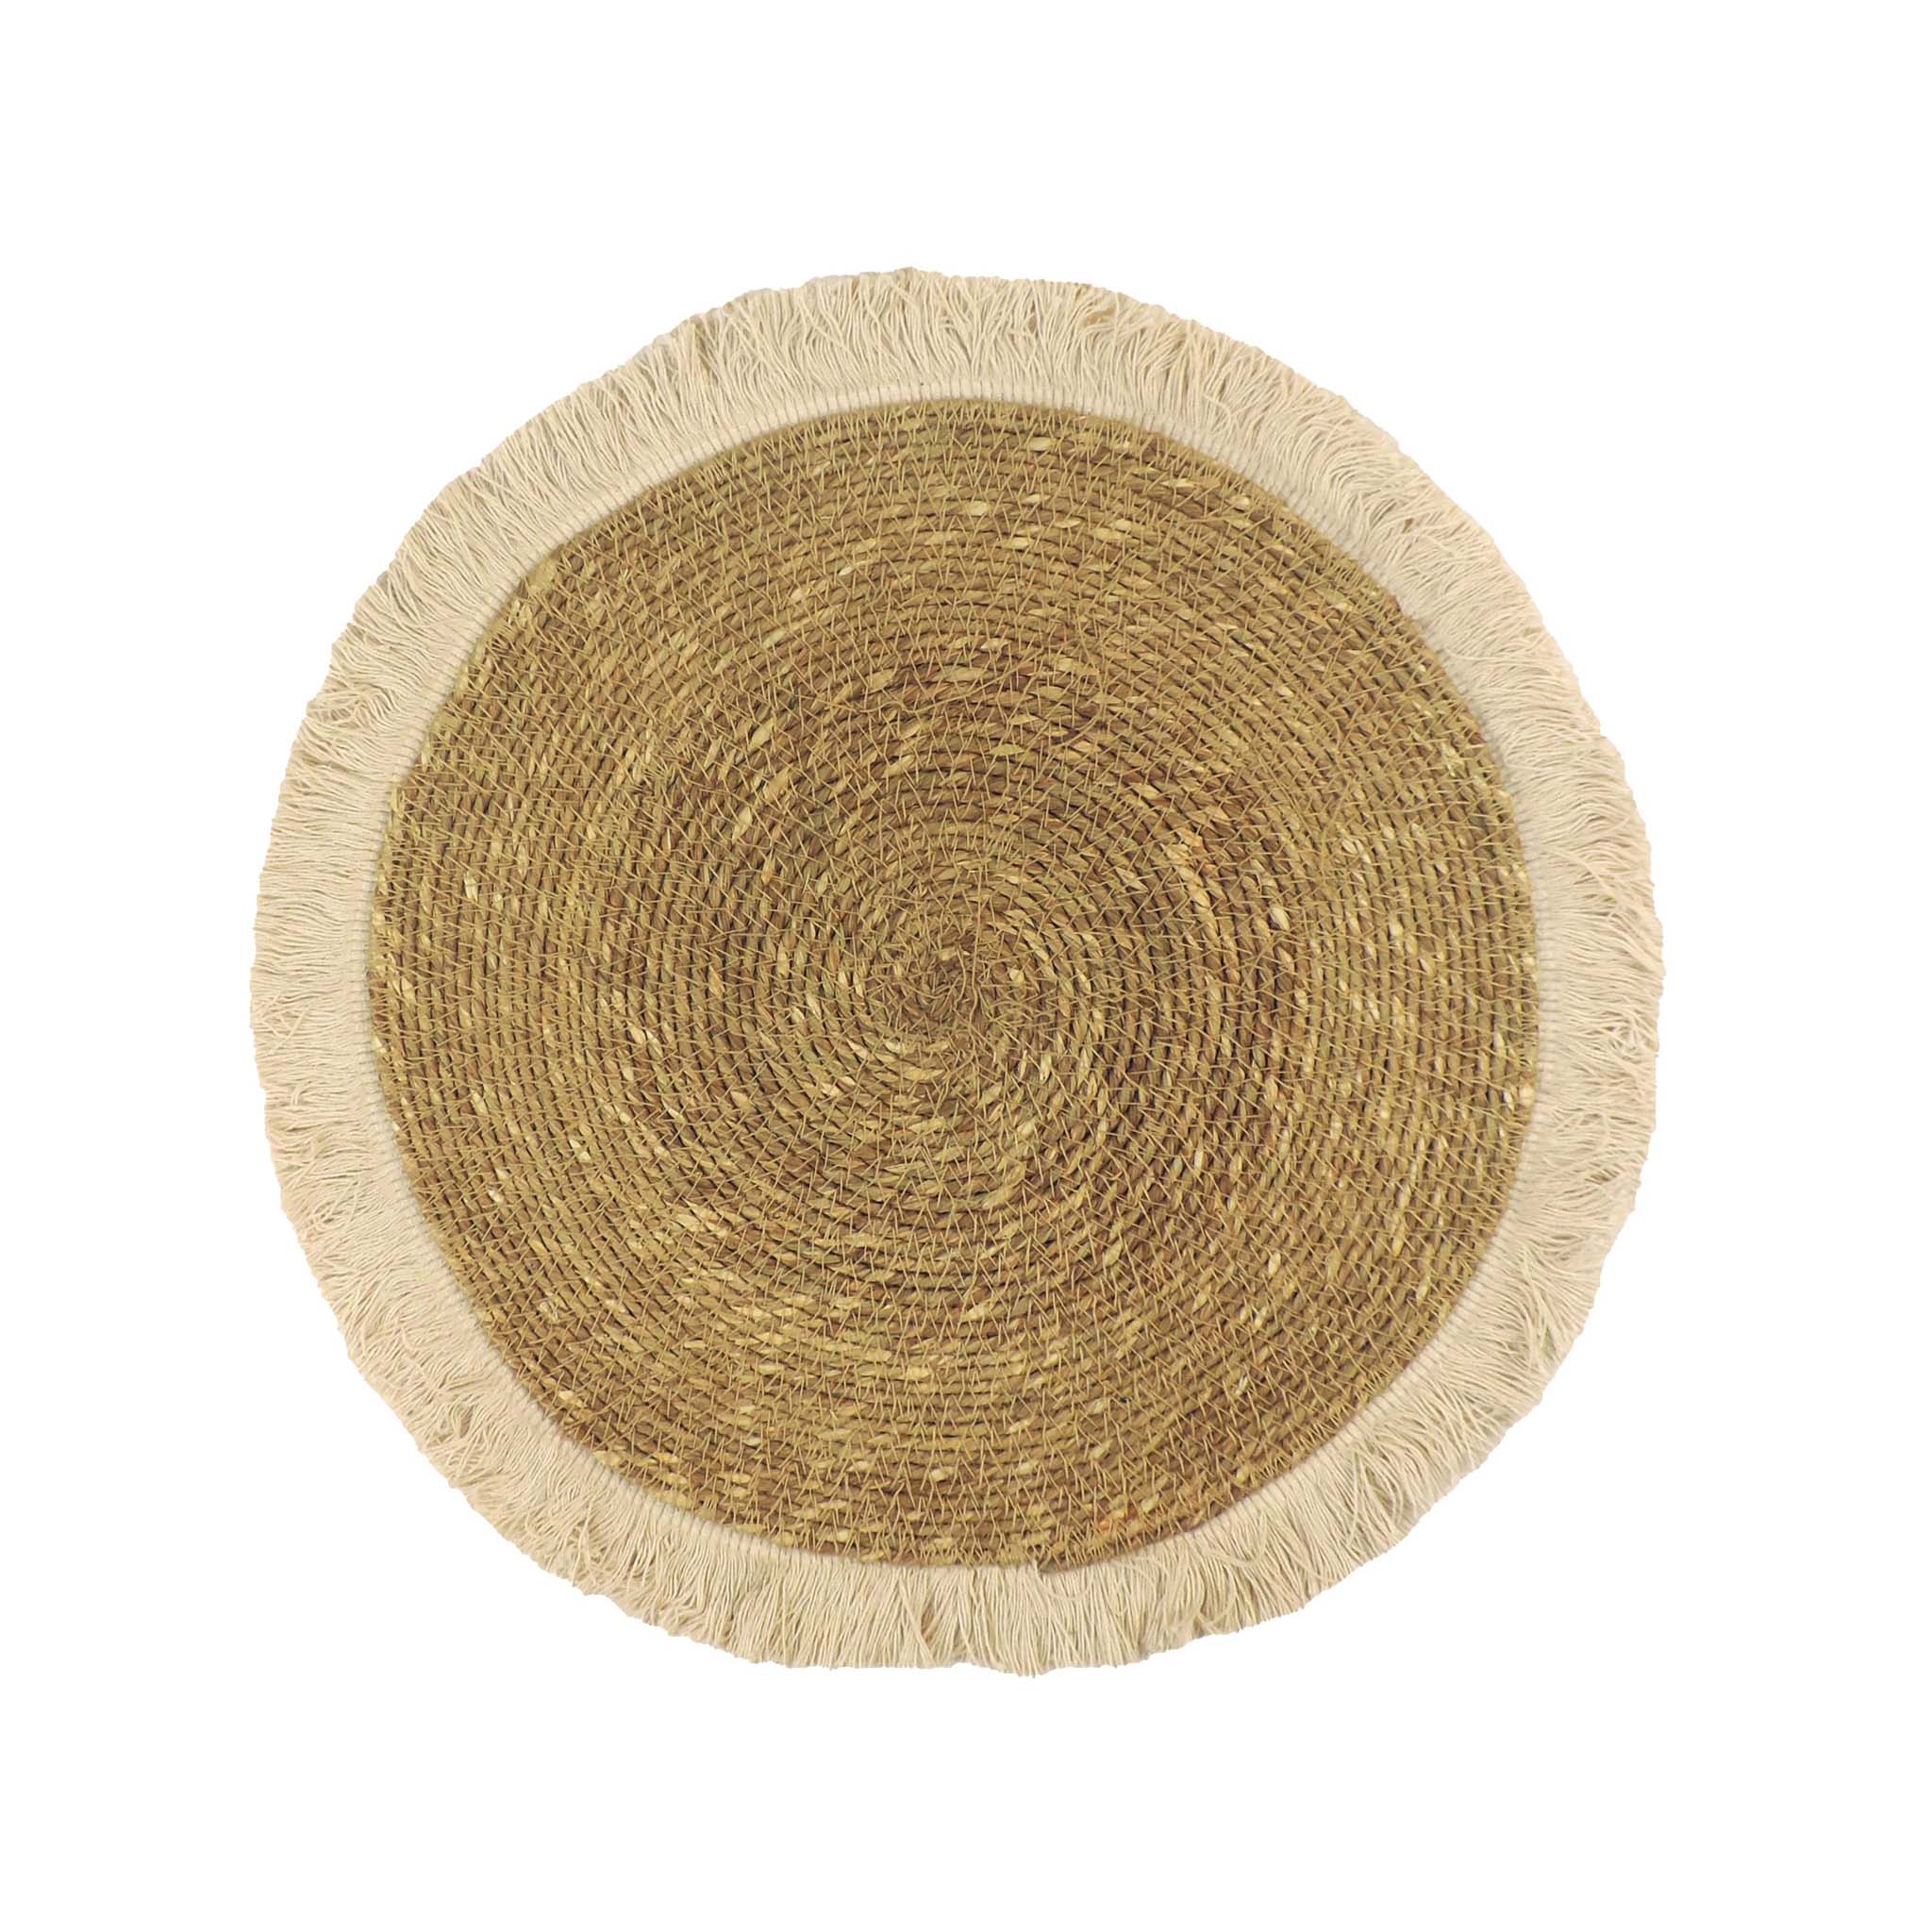 Jute Fringed Edge Placemat in Natural White, Set of 2/4